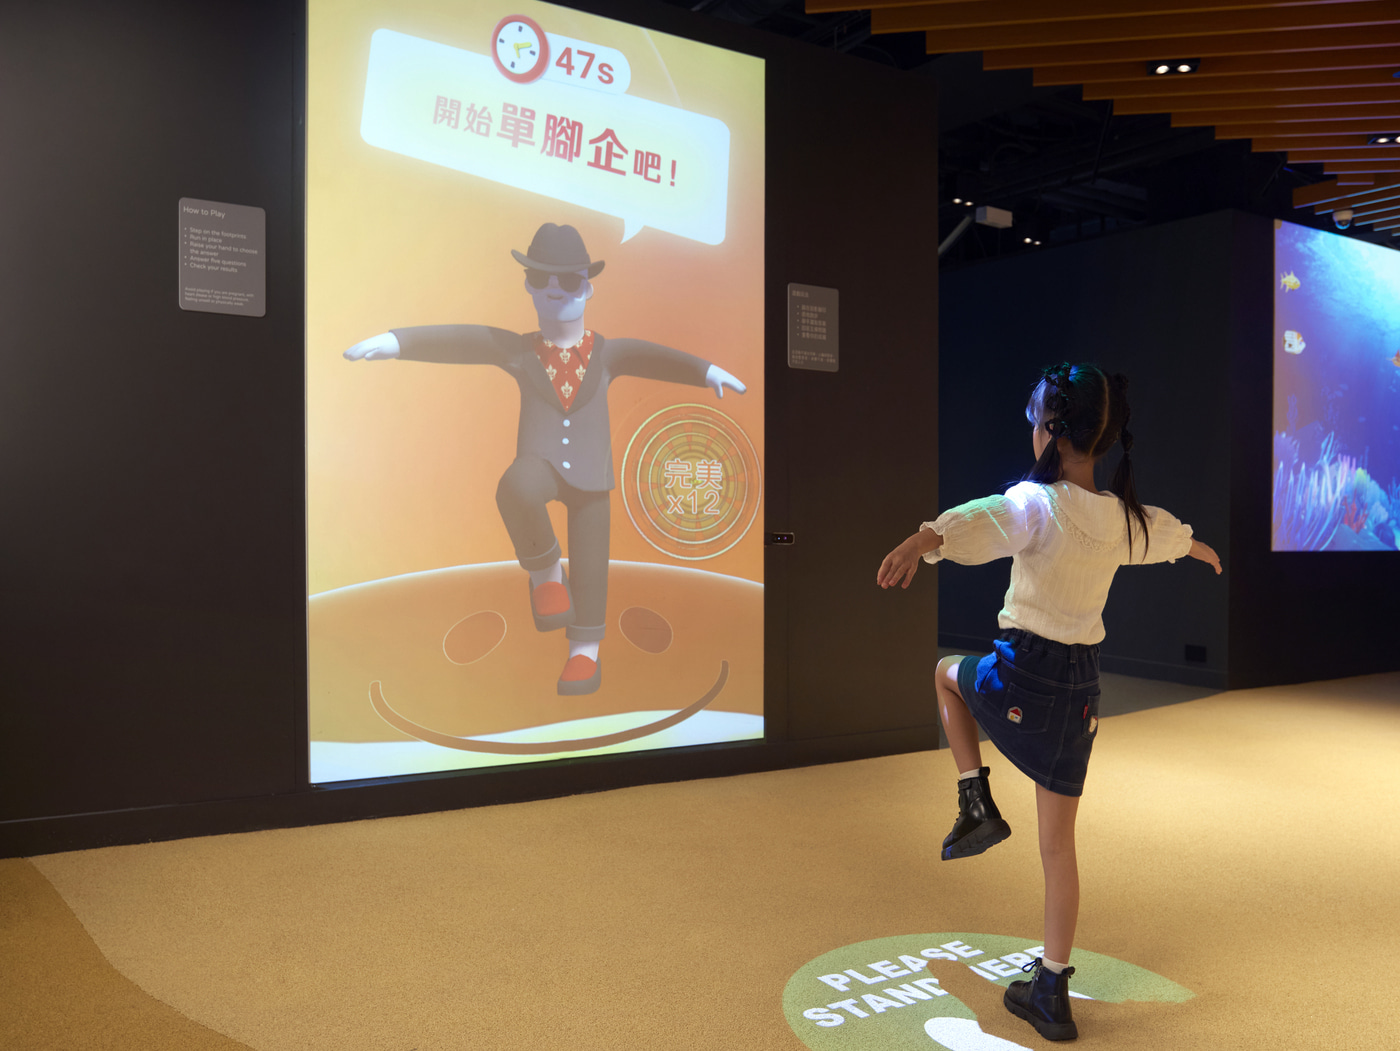 The interactive game lets participants follow the character through a workout to boost their happiness.